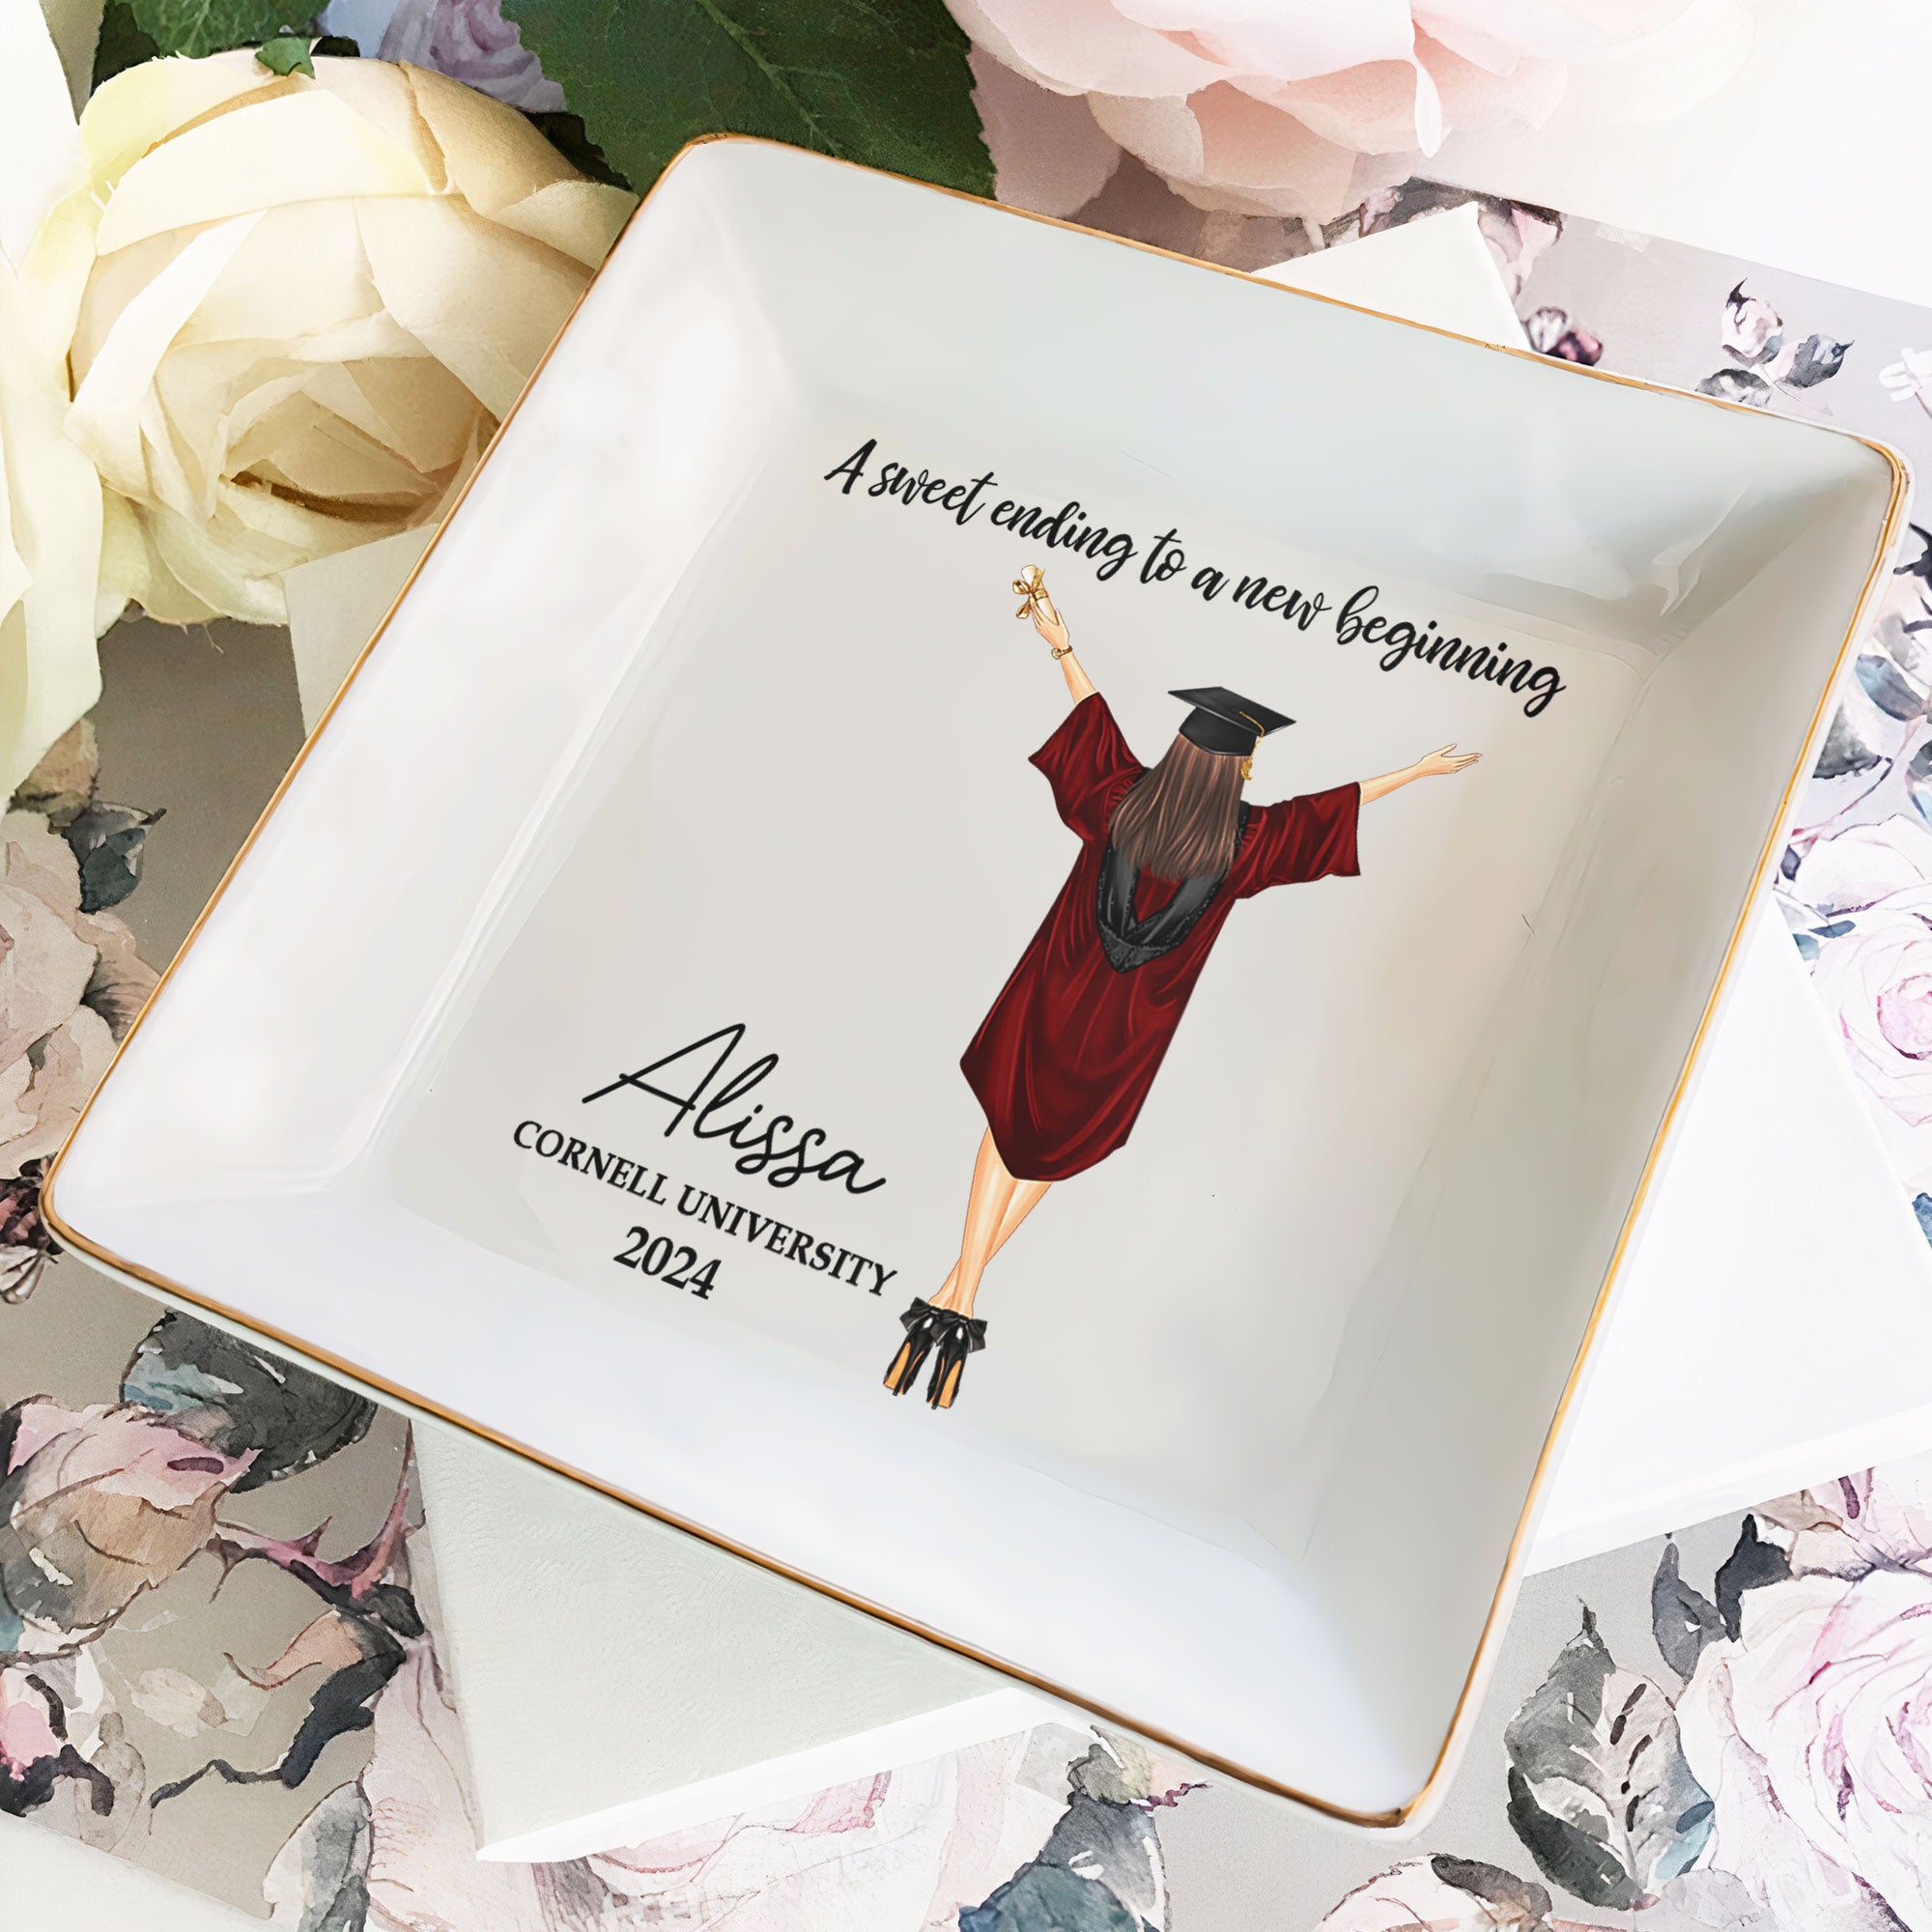 A Sweet Ending To A New Beginning - Personalized Jewelry Dish - Graduation Gift